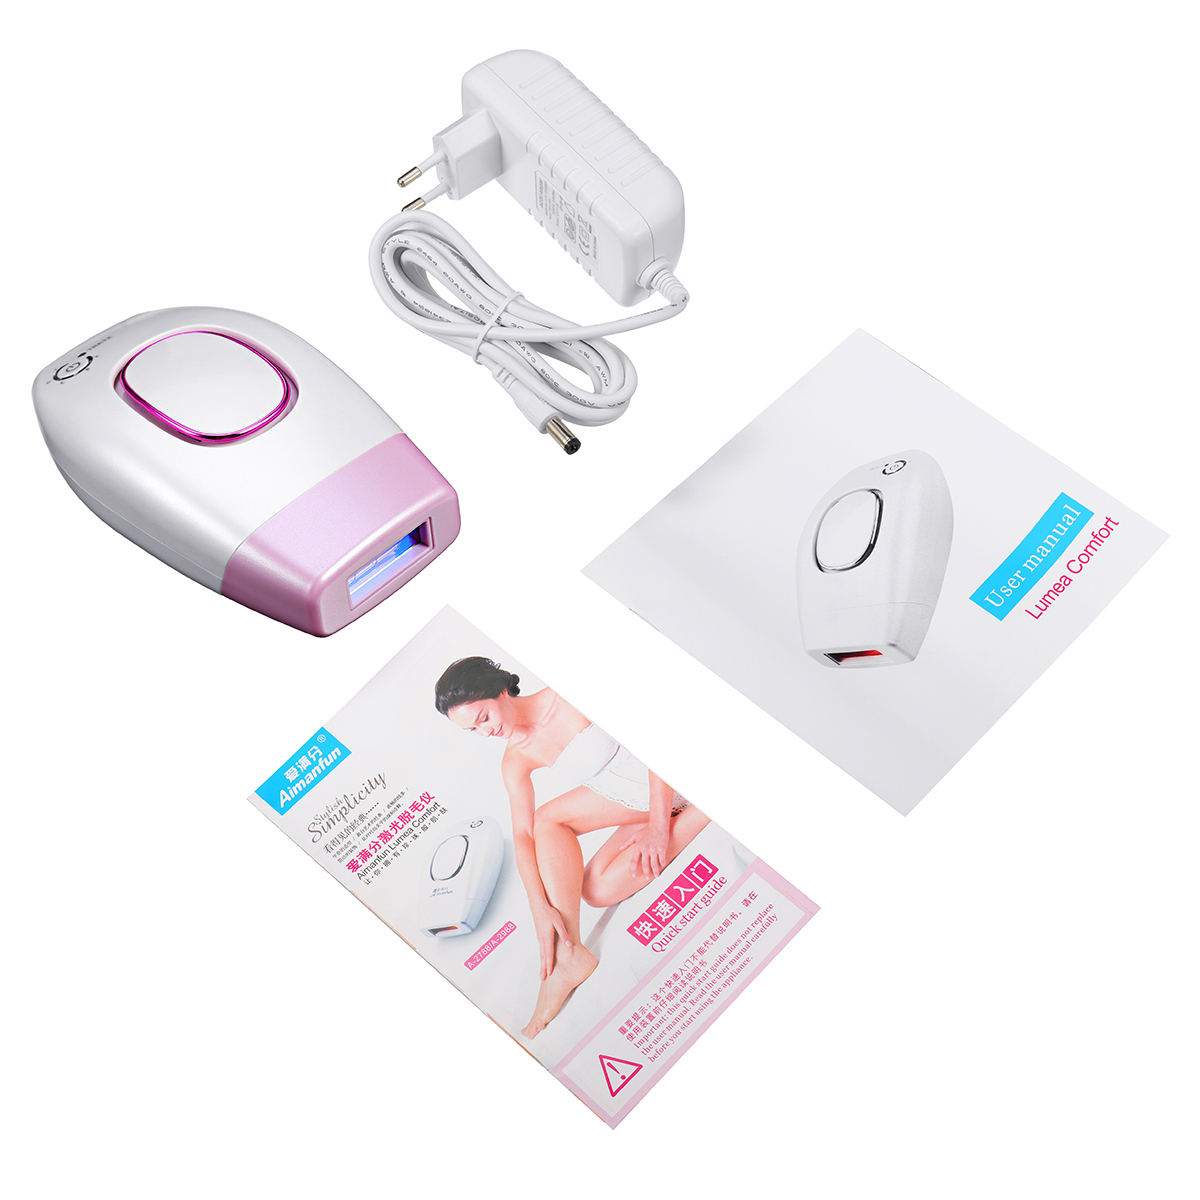 LCD Display Permanent Painless IPL Hair Removal with Temperature Protective System for Face and Body Women and Men at Home Permanent Hair Reduction